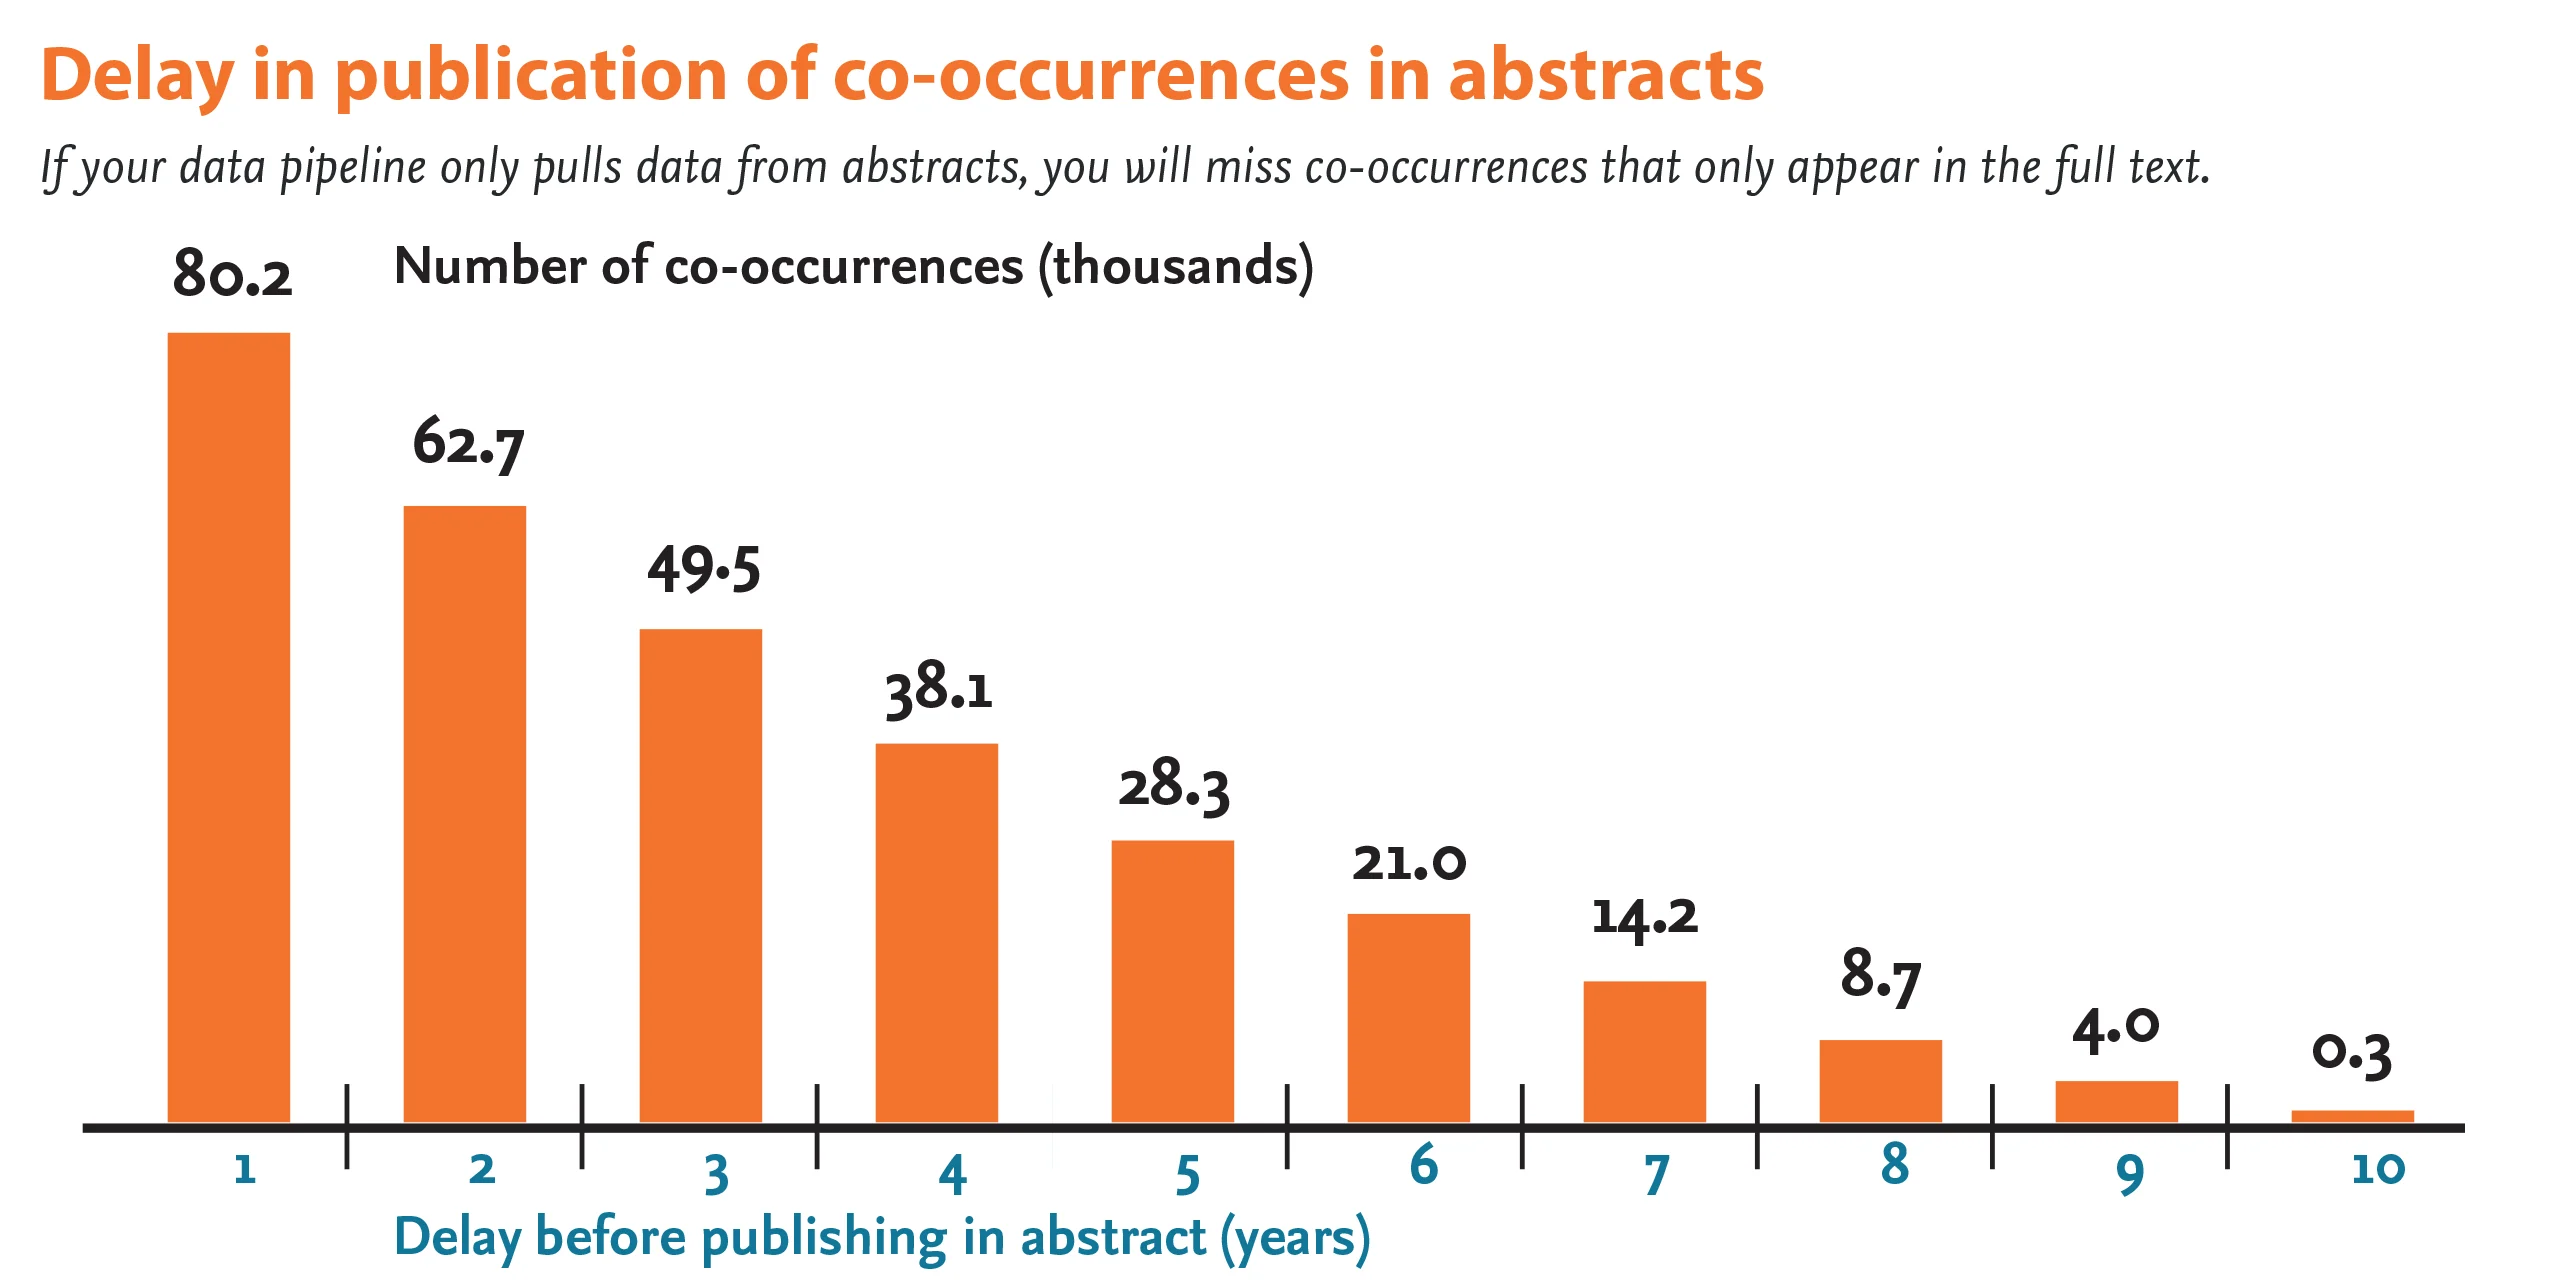 A chart showing how if your data pipeline only pulls data from abstracts, you will miss co-occurrences that only appear in the full text.